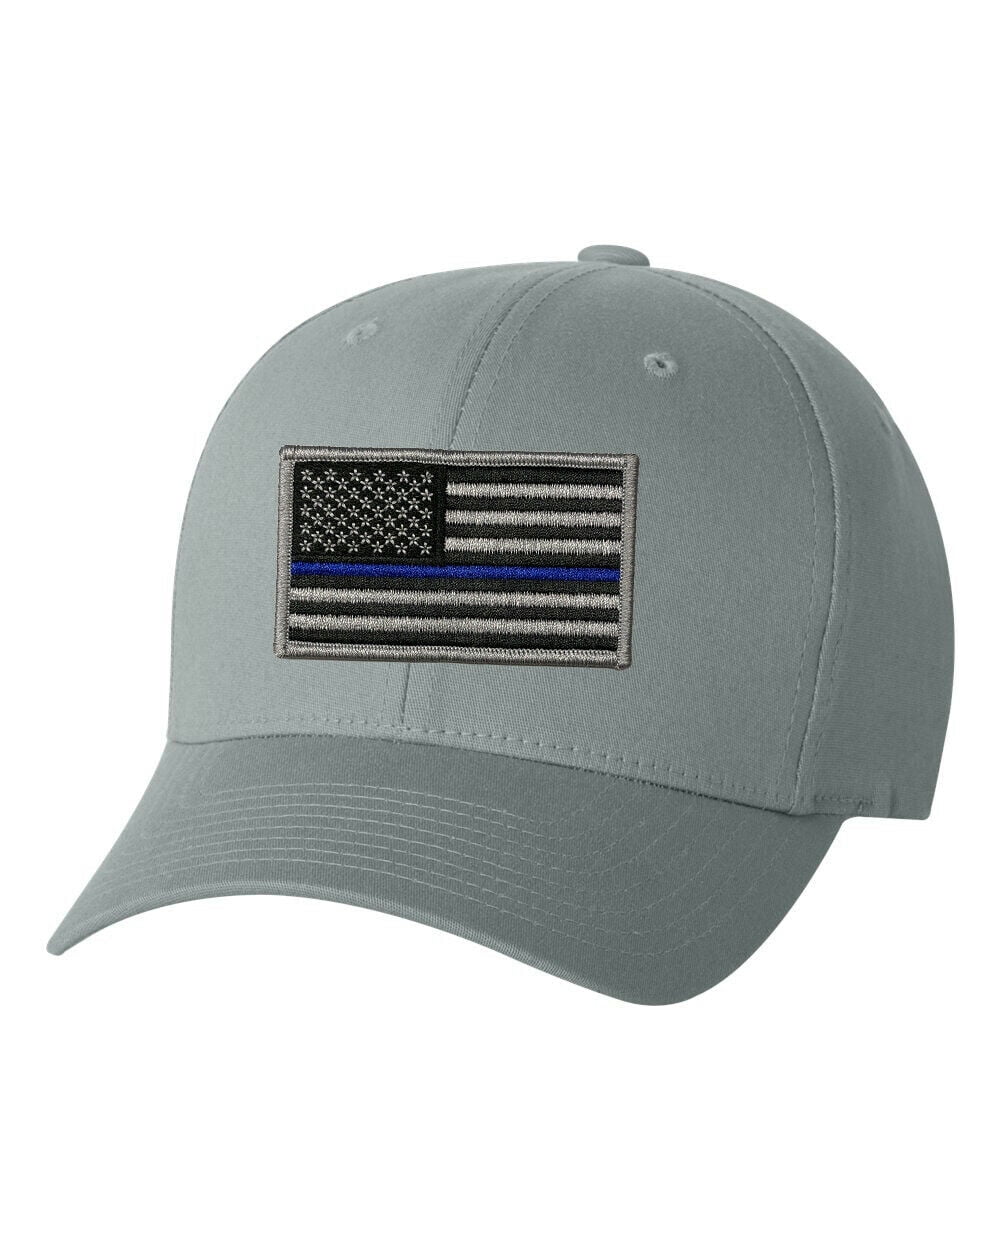 Flexfit Hat Twill with Fitted Baseball Patch Flag Line Blue V-Flex Thin Cap